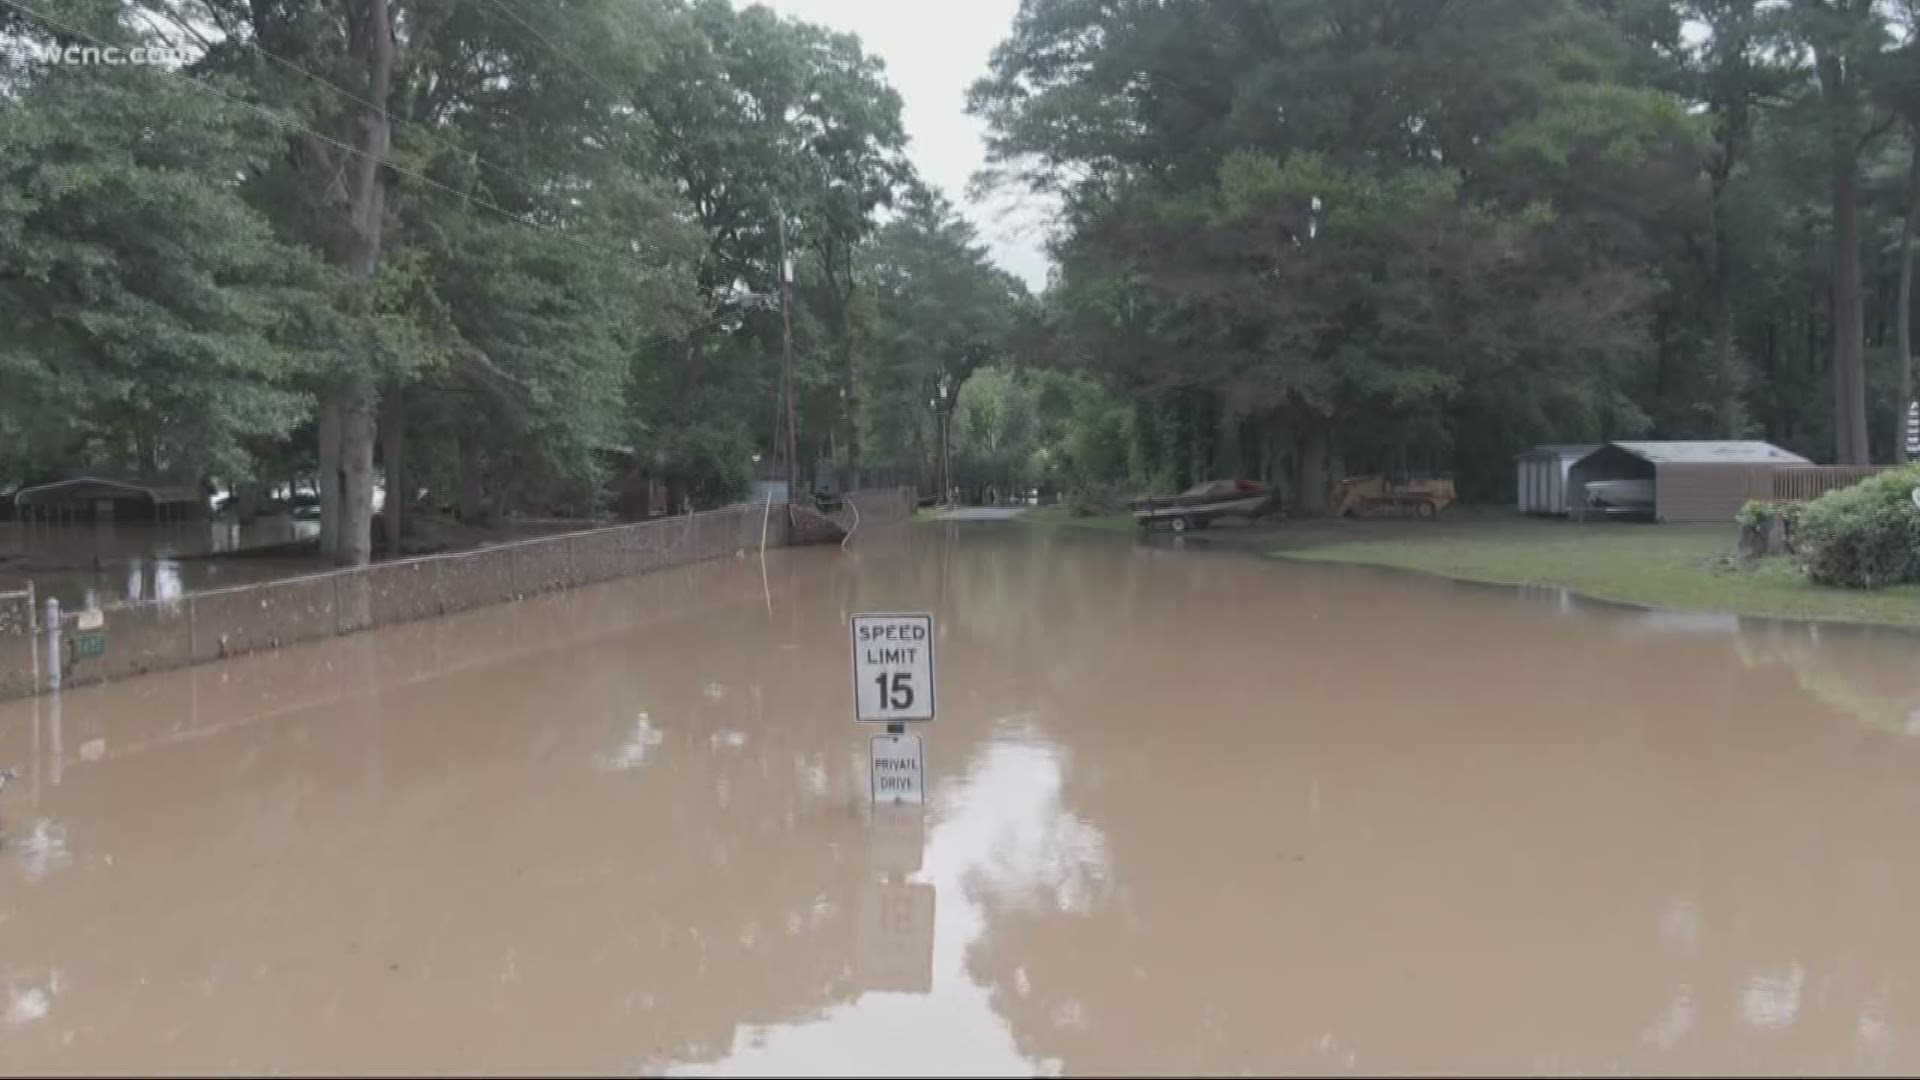 There has been widespread damage from Alexander to York Counties. In Mecklenburg County, Mountain Island Lake hit the second highest crest on record Monday morning.